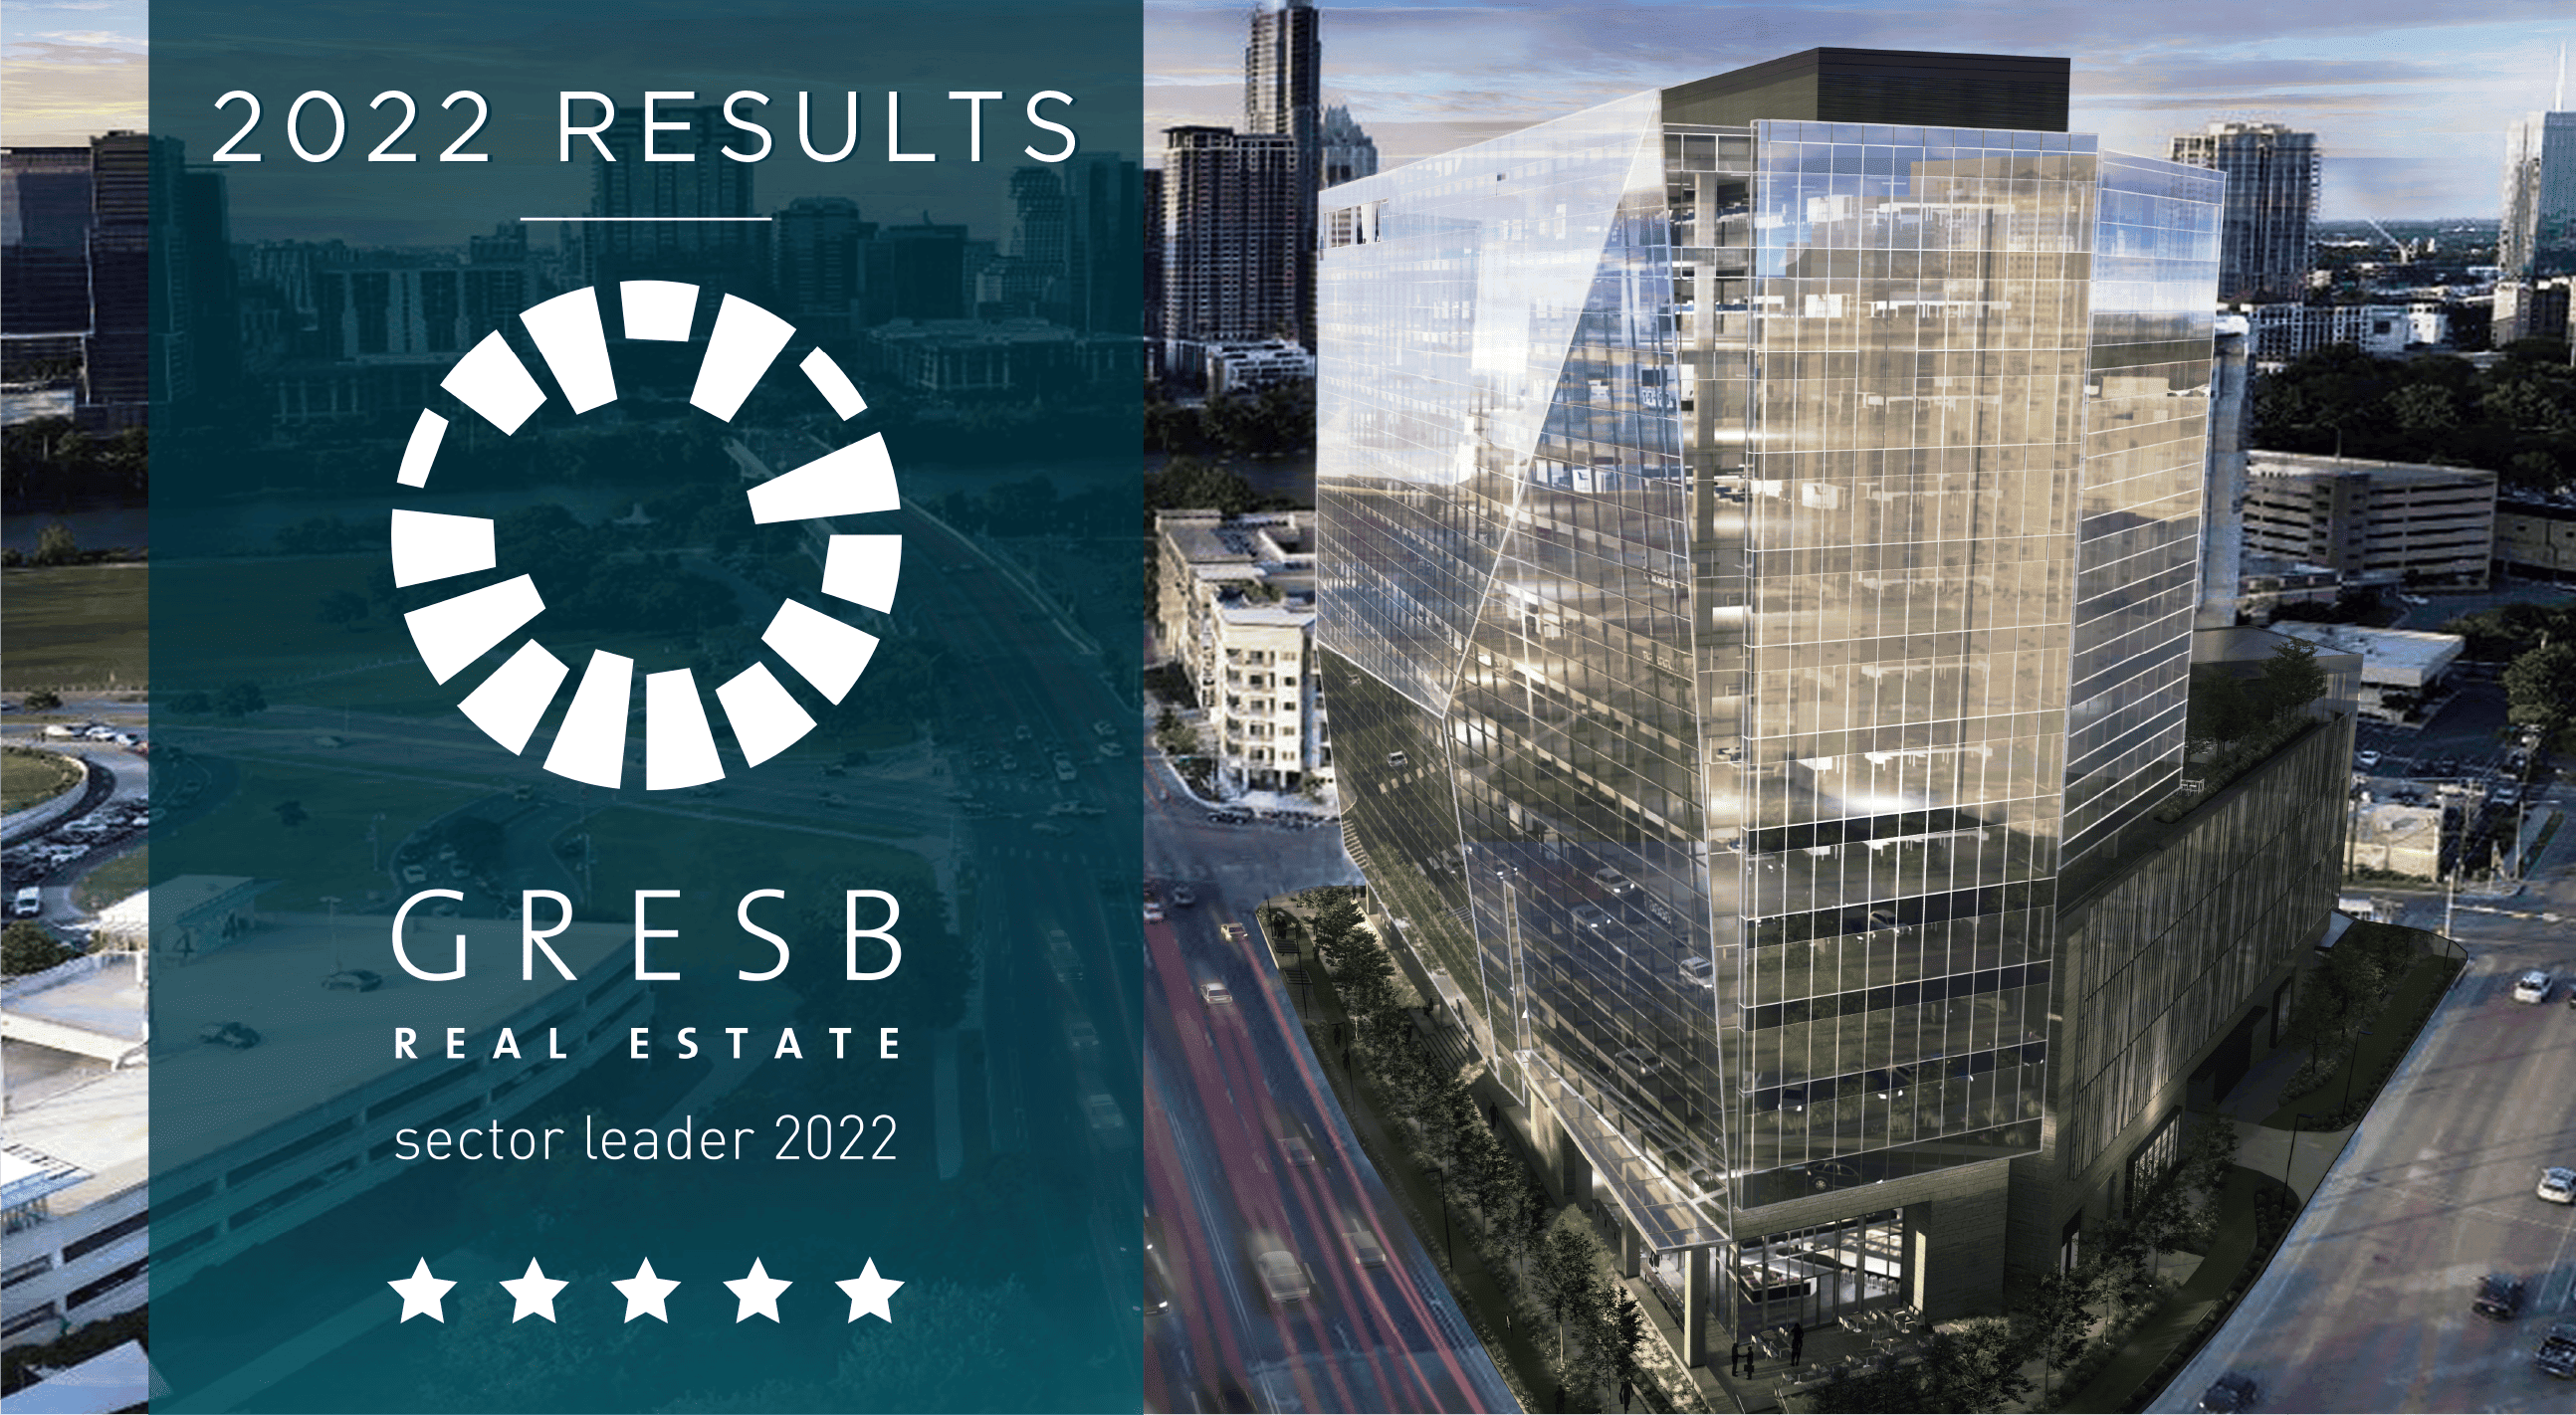 GRESB Awards QuadReal with Top ESG Ranking in 2022 Real Estate Assessment